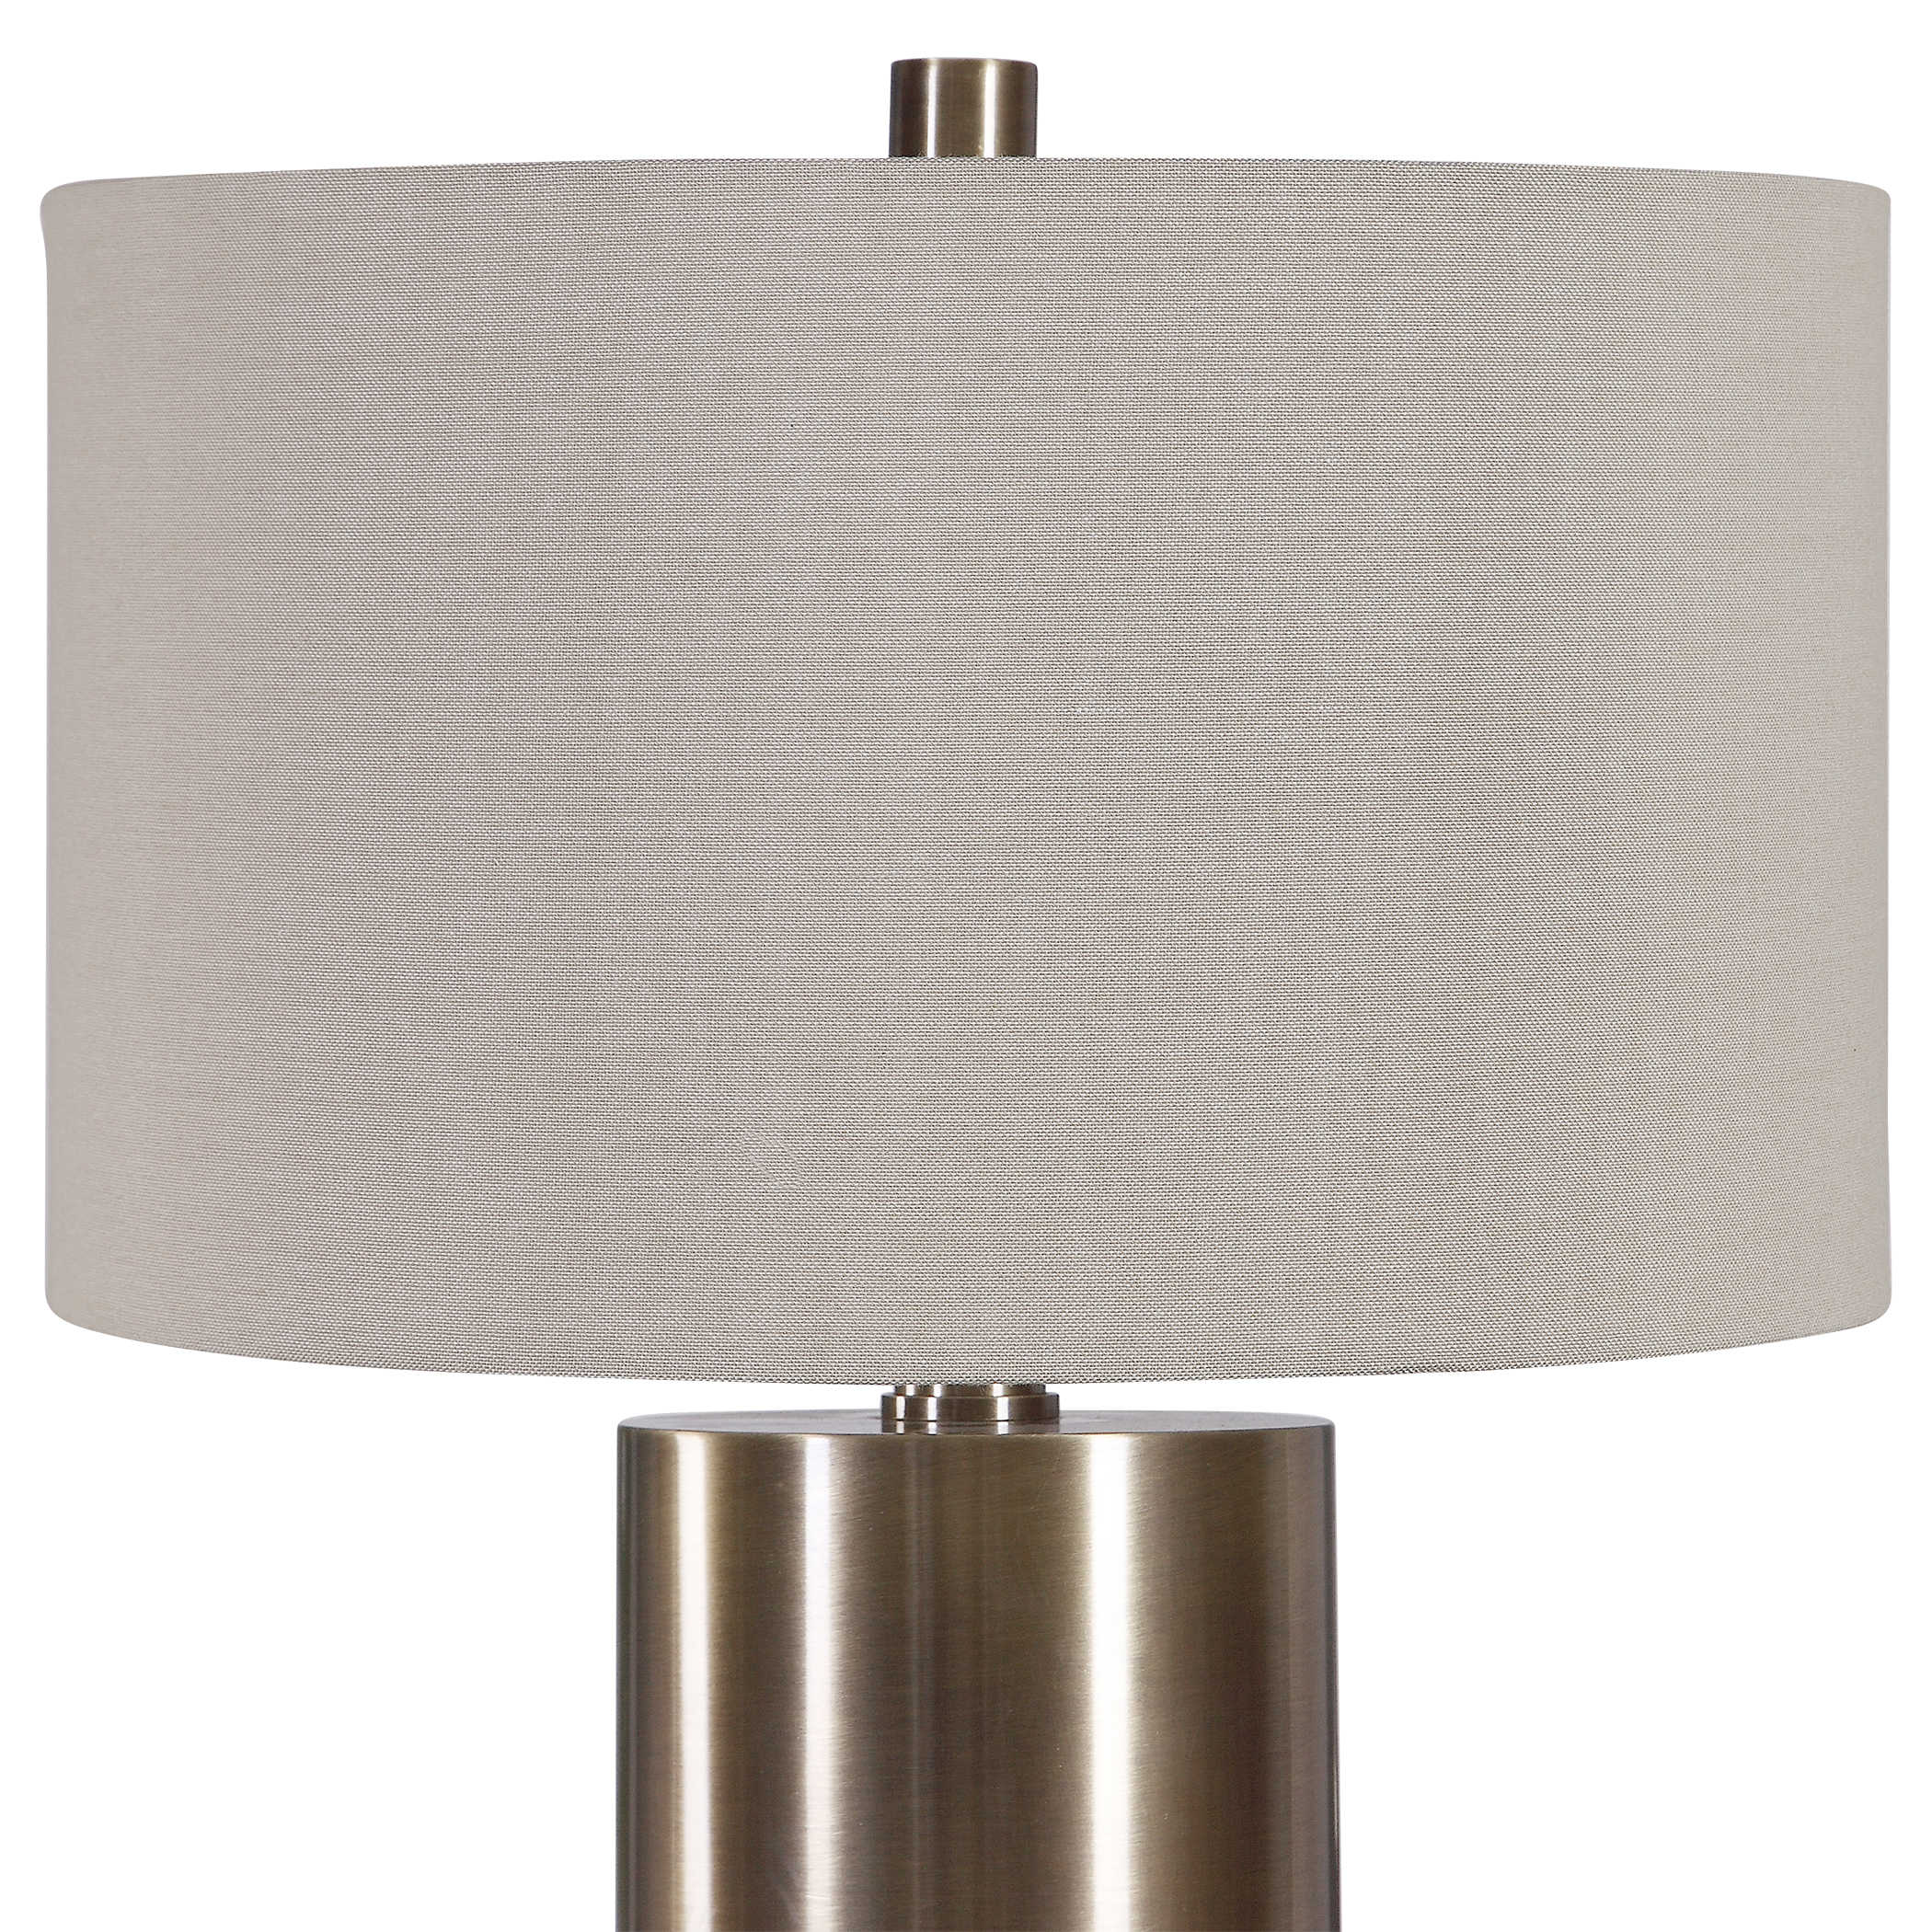 Taria Table Lamp | Uttermost